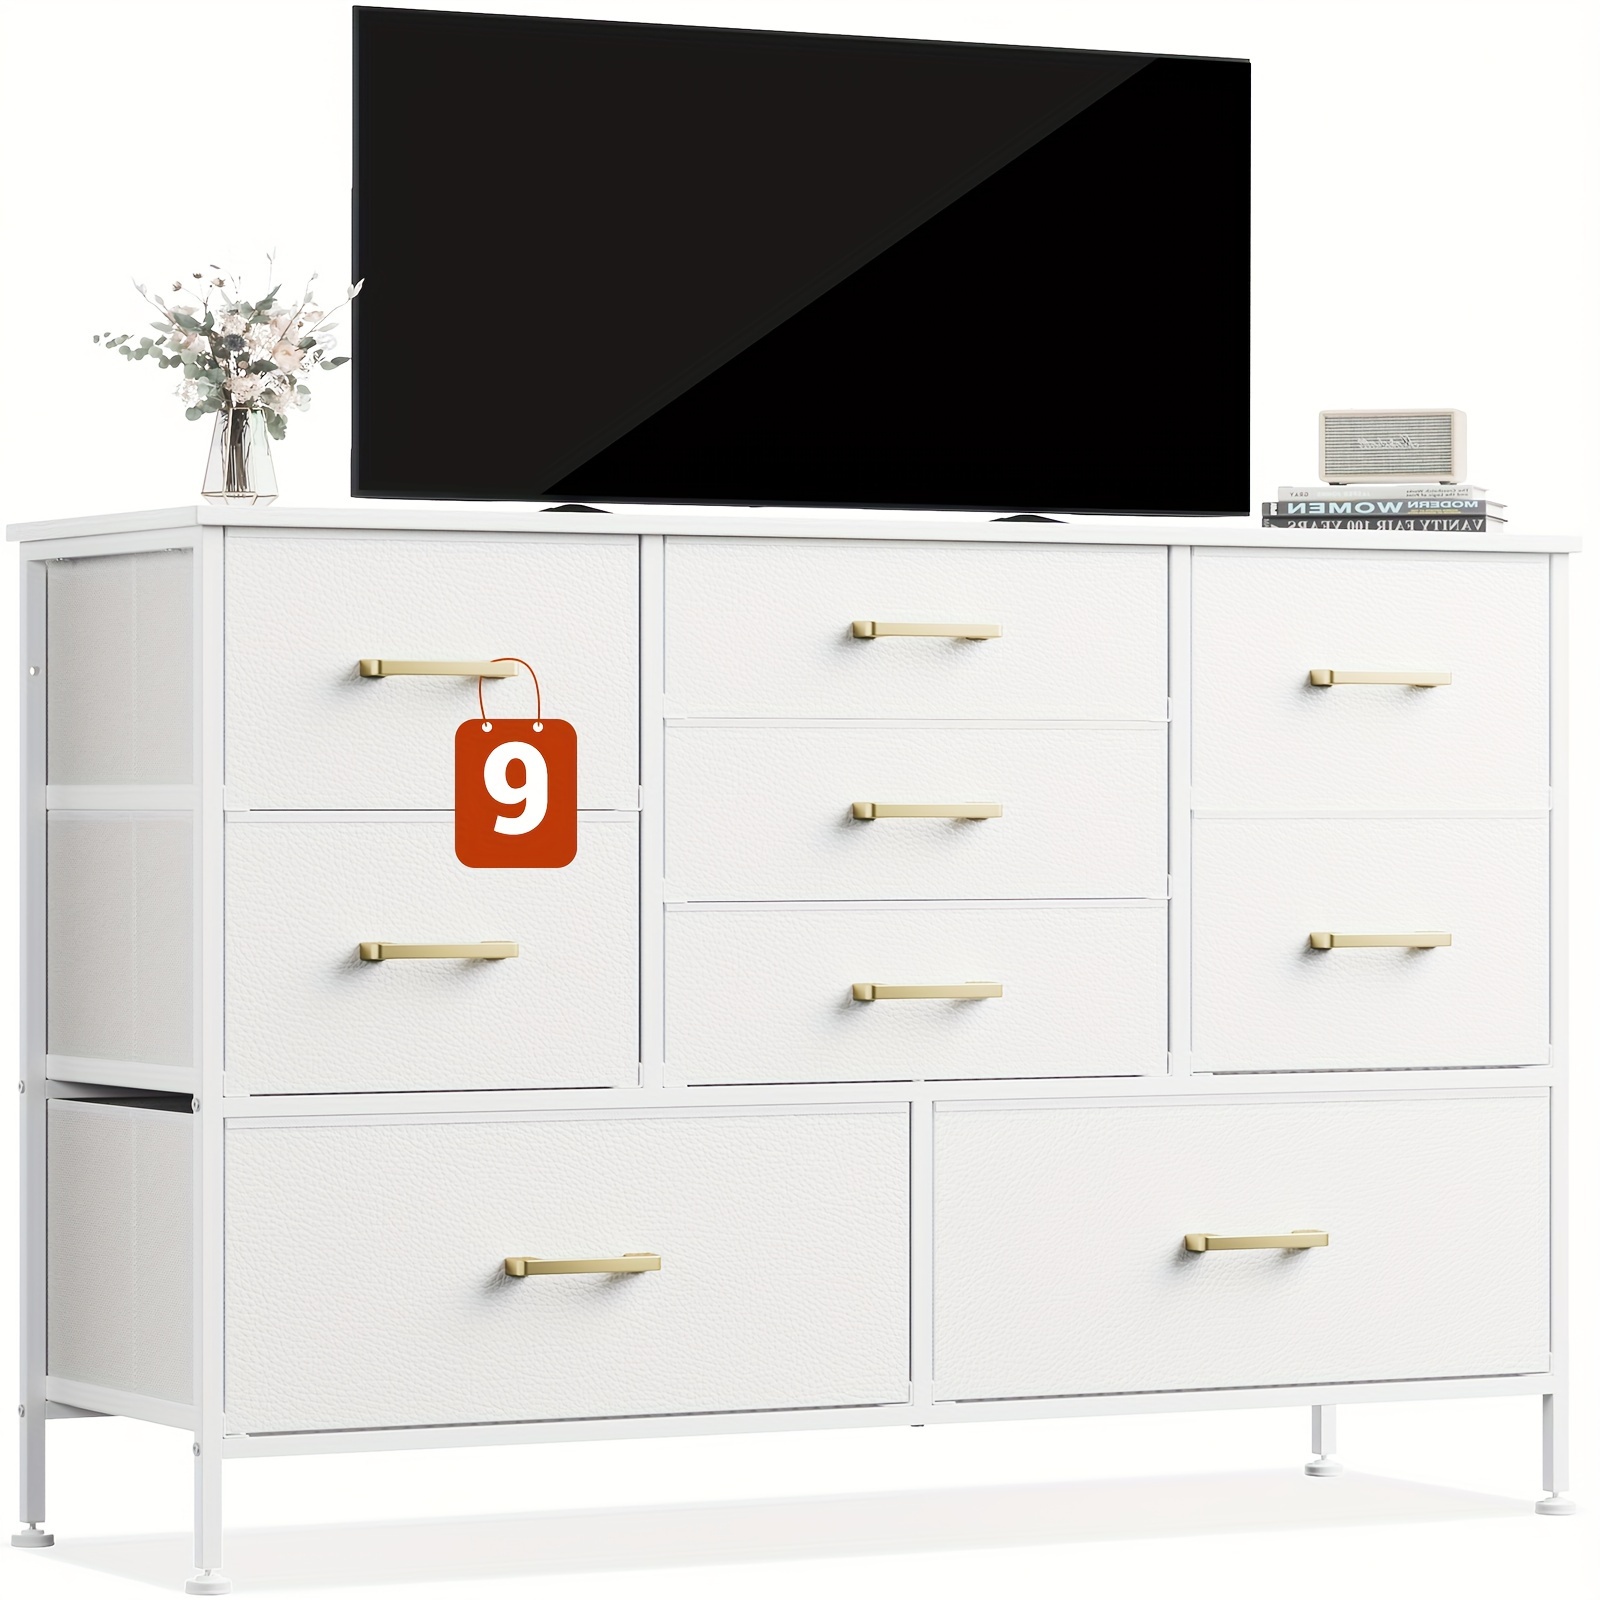 

White Wide Dresser Tv Stand, Entertainment Center With 9 Fabric Drawers, Golden Handle, Storage Organizer Unit For Bedroom, Living Room, Closet, Entryway, Hallway, Black, Pink, Blue, Brown